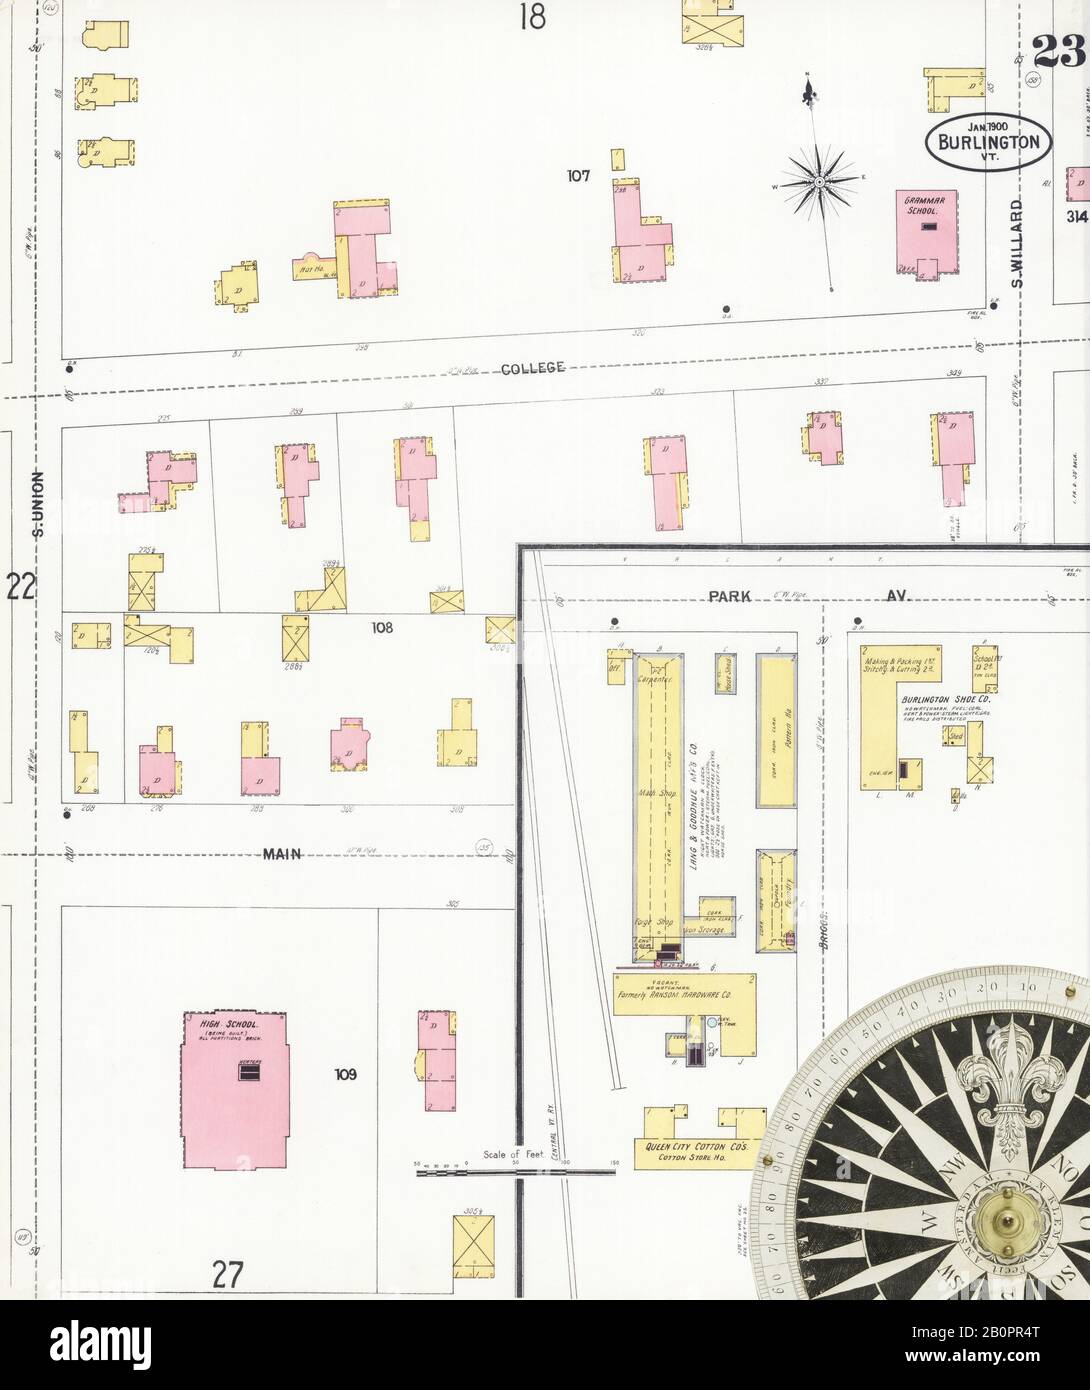 Image 24 of Sanborn Fire Insurance Map from Burlington, Chittenden County, Vermont. Jan 1900. 34 Sheet(s), America, street map with a Nineteenth Century compass Stock Photo